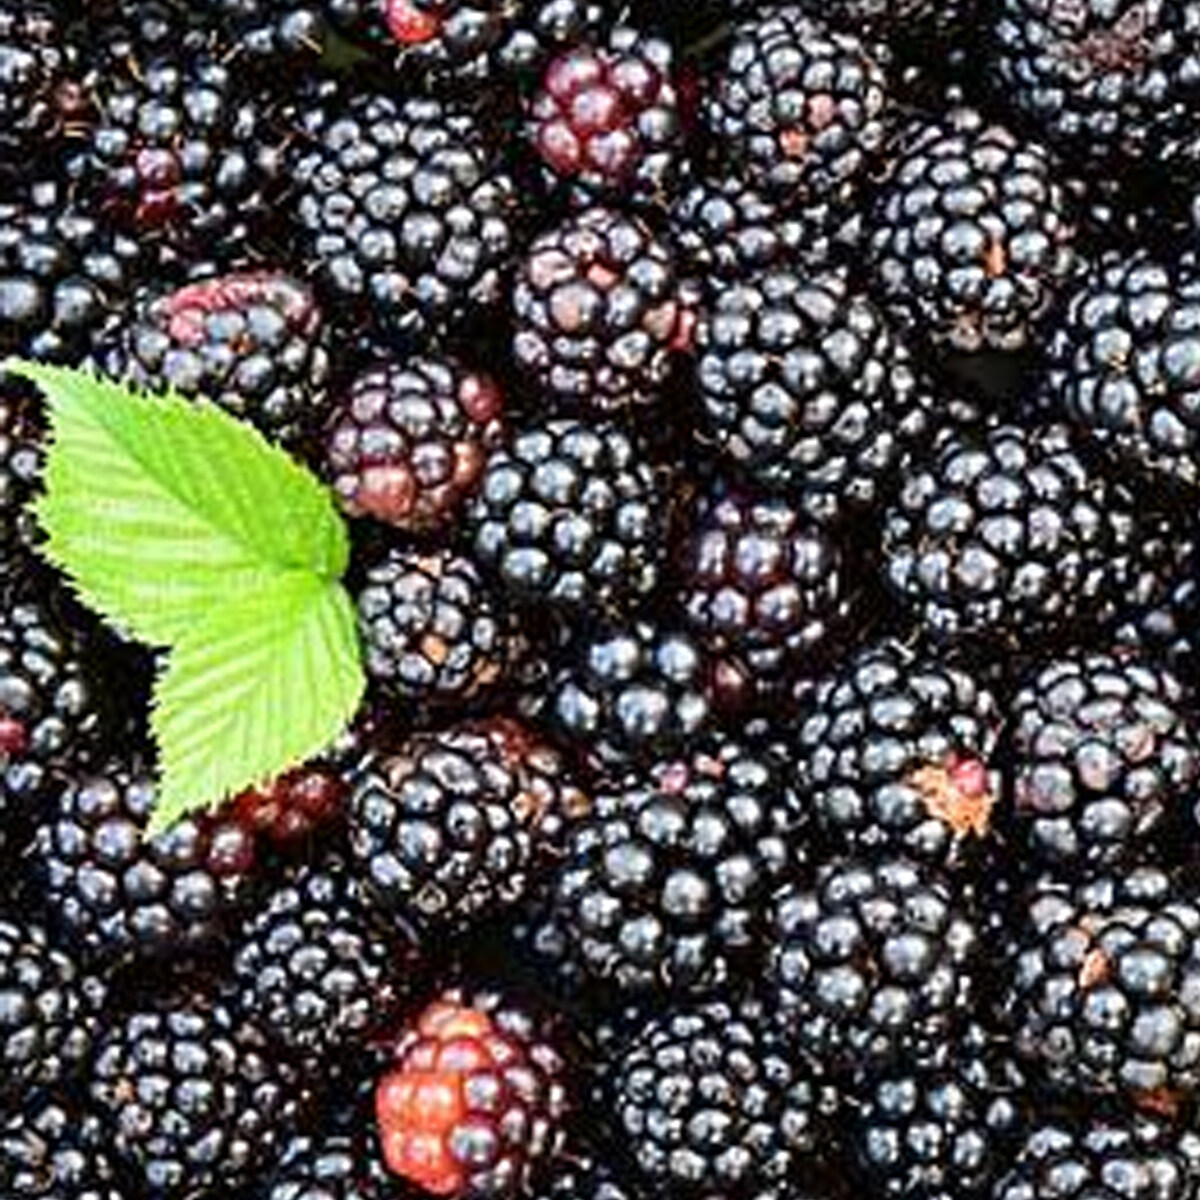 Best Price Certified Quality Hot Sale New Season Bulk Fruit Products IQF Frozen Blackberry From China